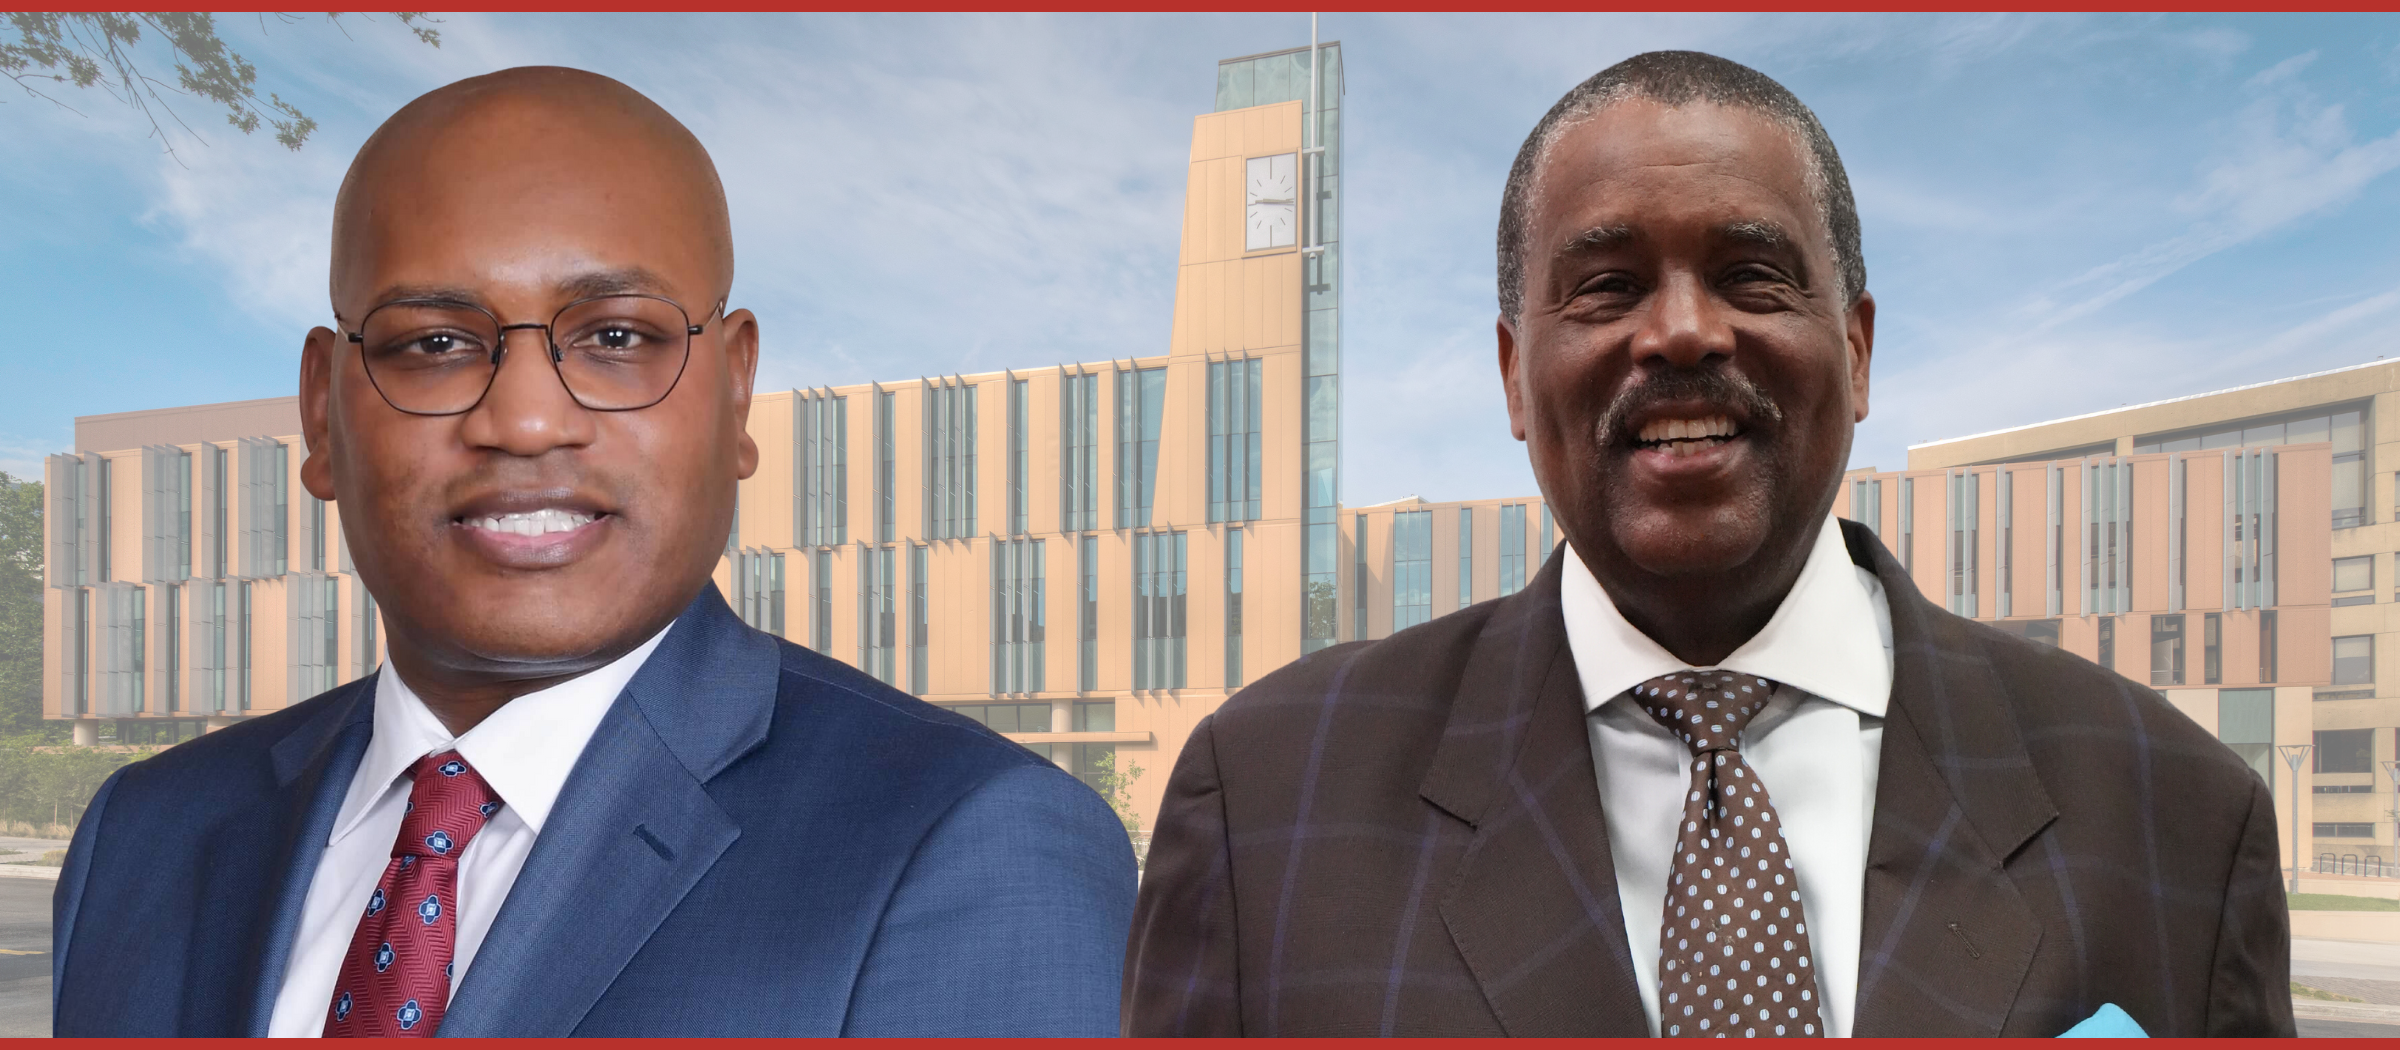 On September 19, the DC Council voted to approve Lamont Akins and Warner H. Session as the newest members of the University of the District of Columbia Board of Trustees